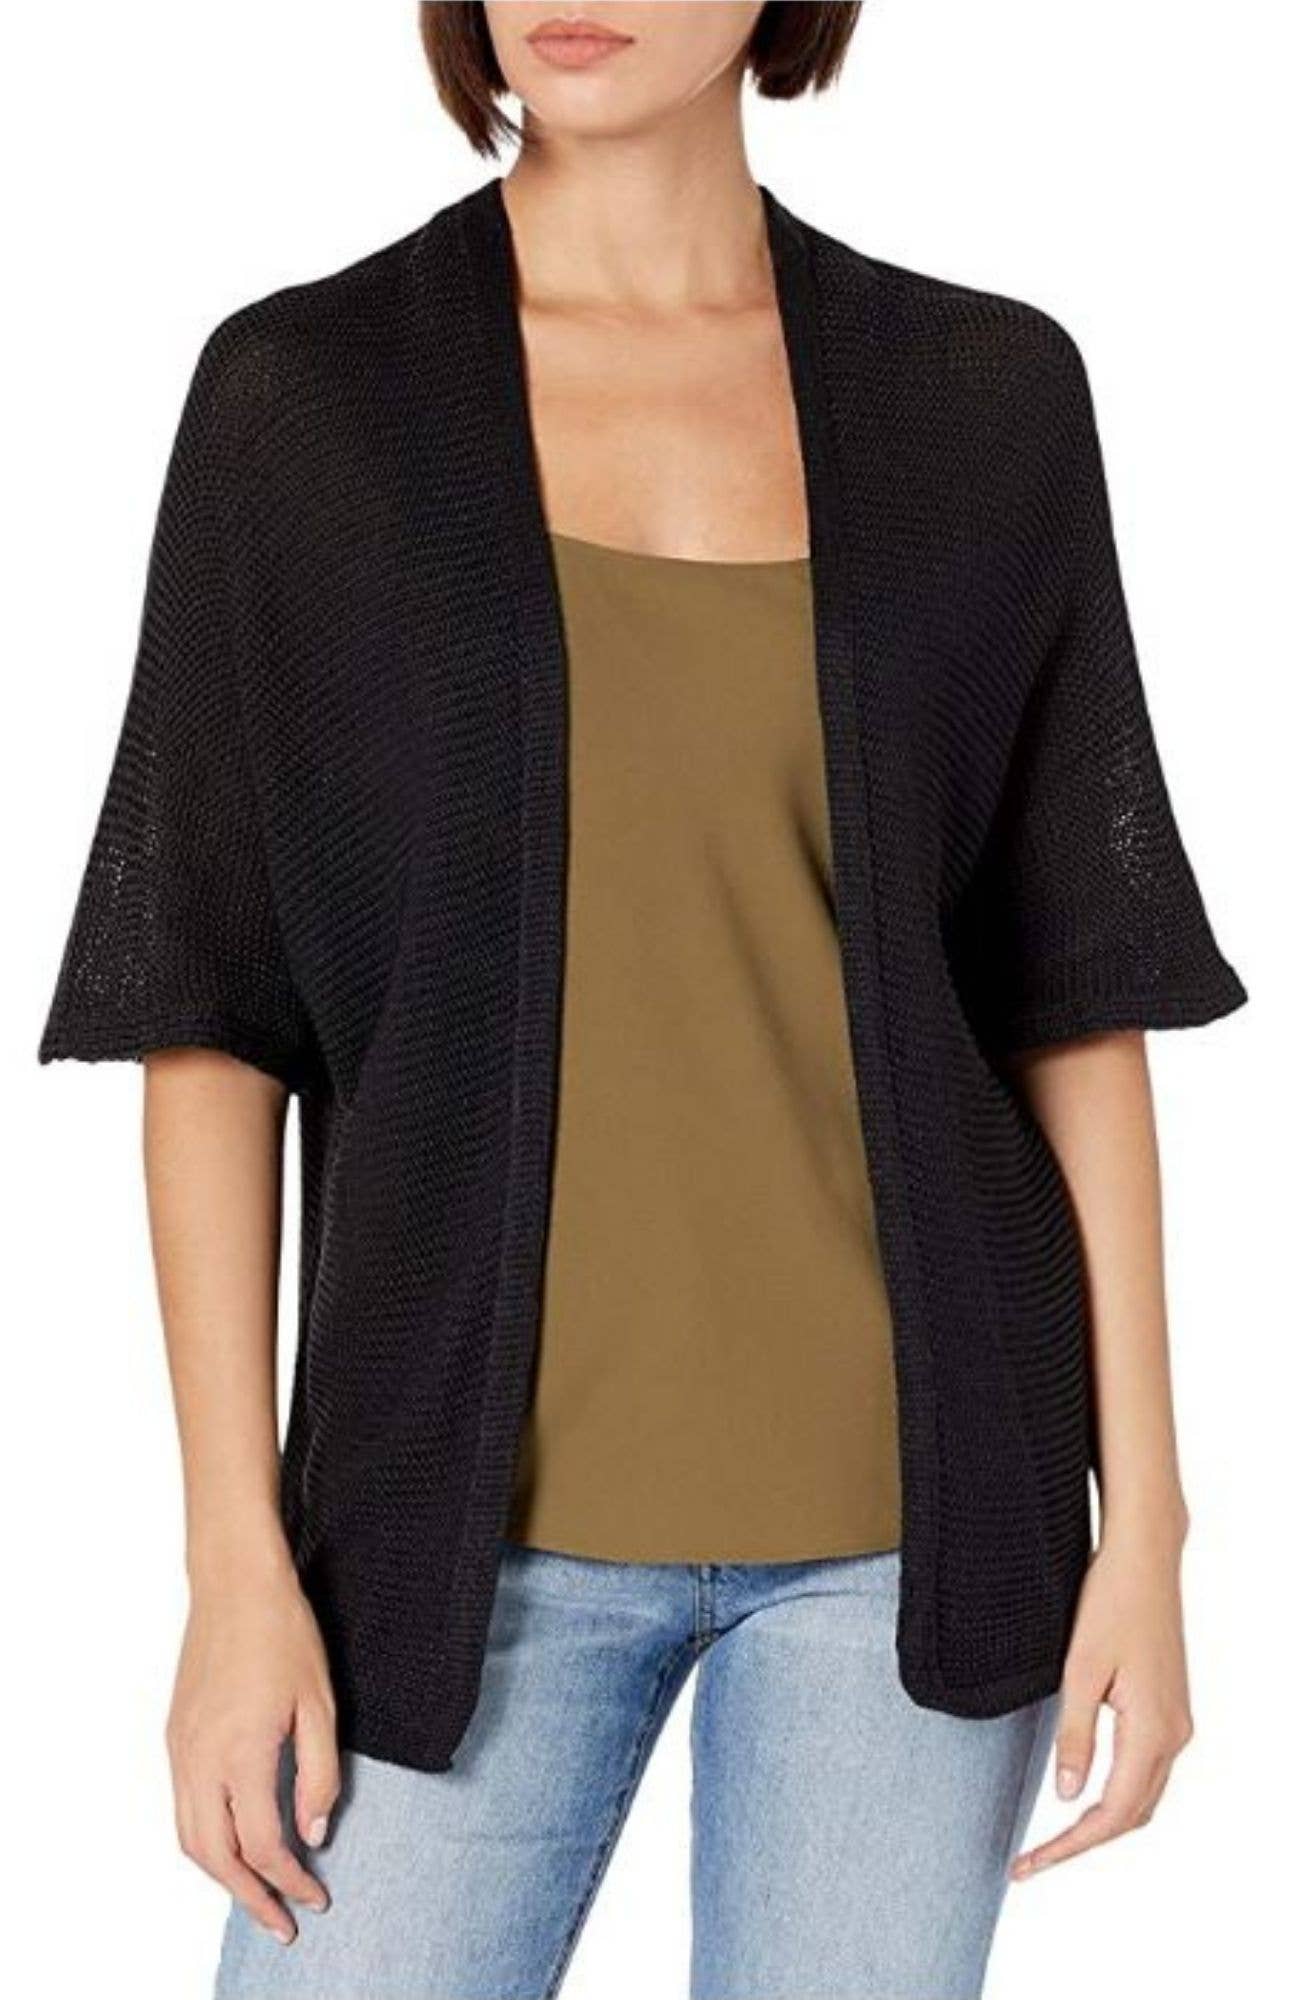  Women's Waffle Knit Waterfall Cardigan Long Sleeve Cardigan  Loose Open Front Sweater Coat Black : Clothing, Shoes & Jewelry